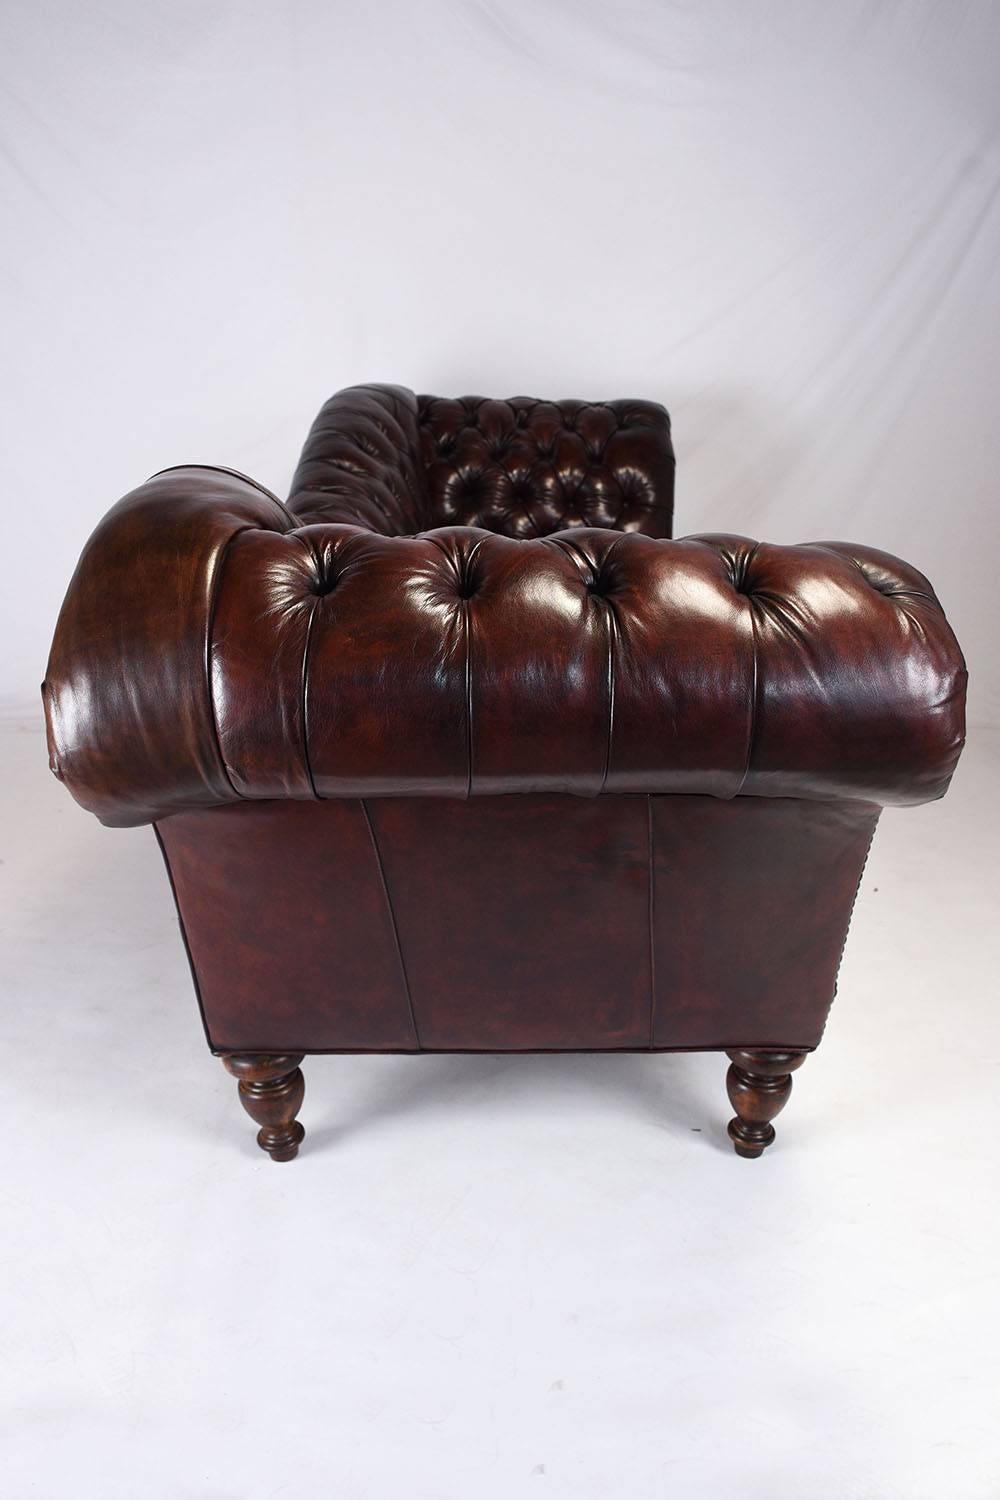 Hollywood Regency Vintage Chesterfield Tufted Leather Sofa